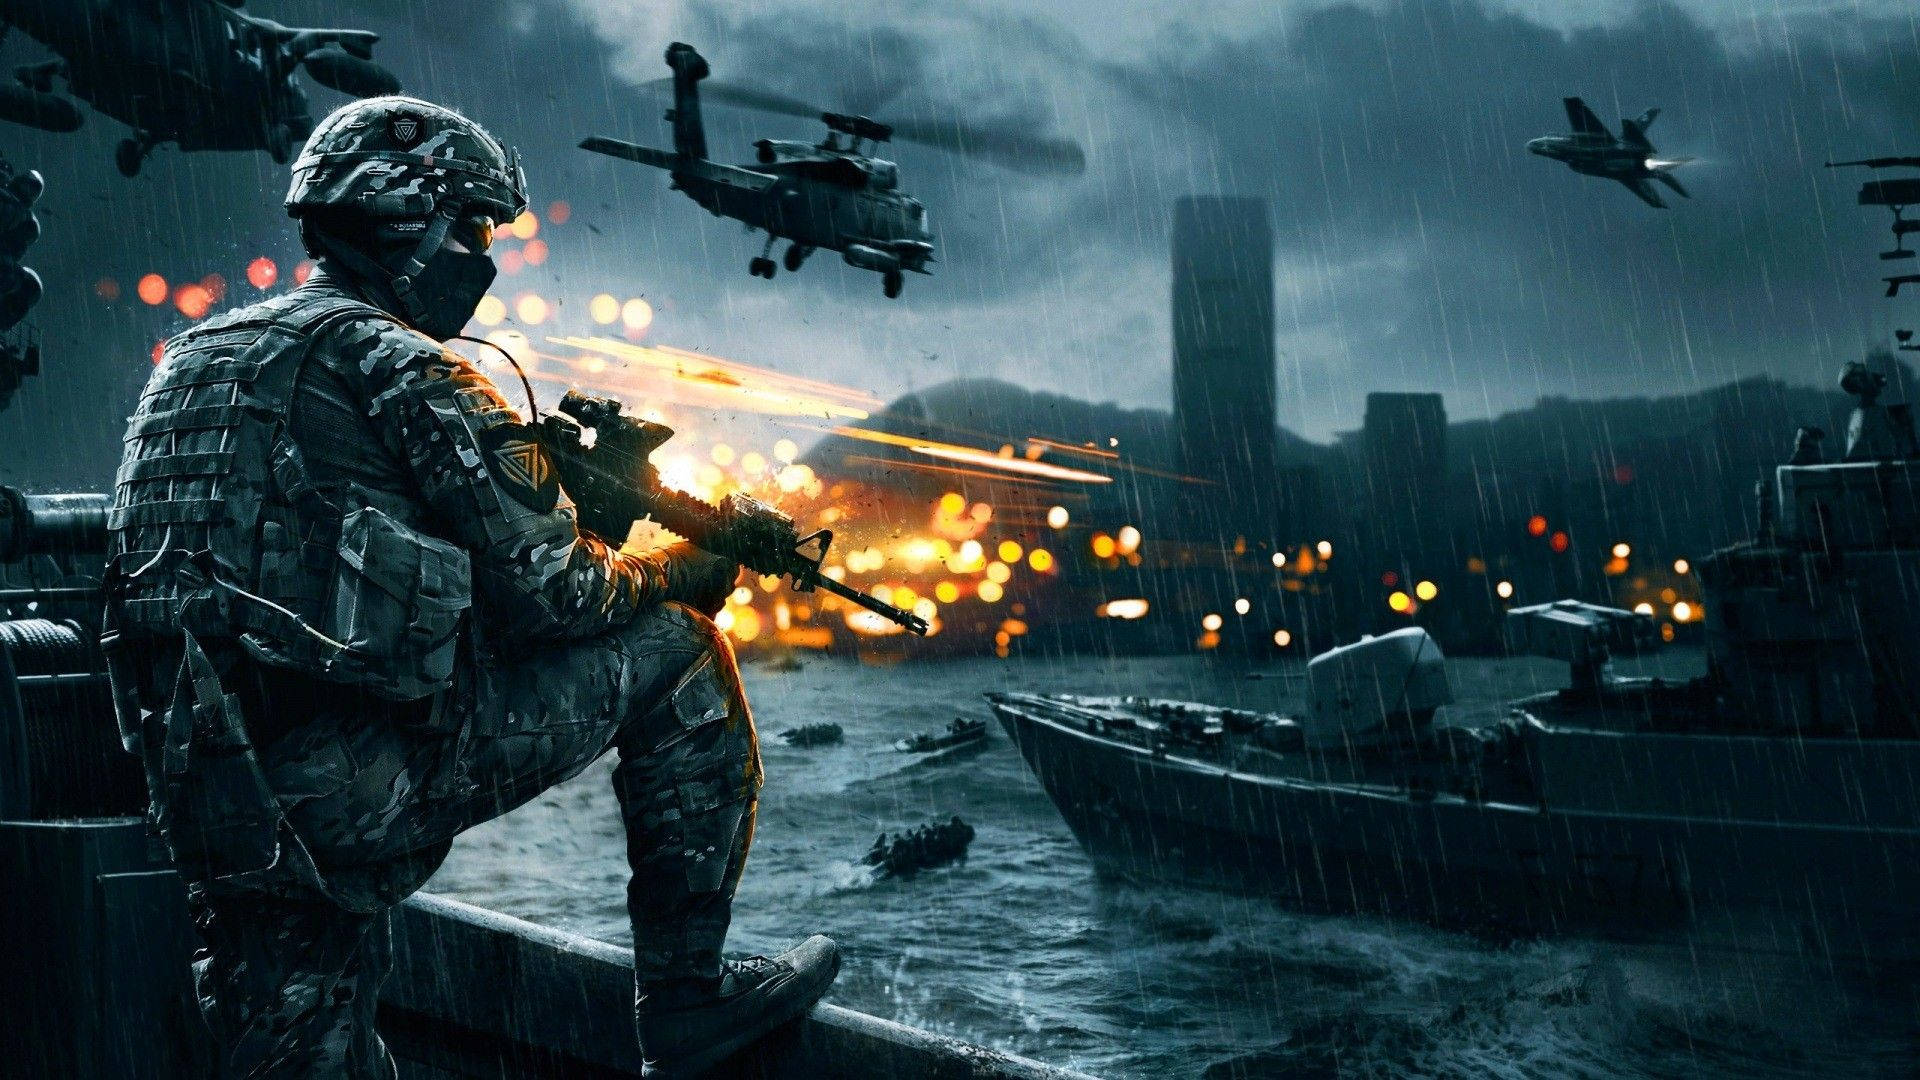 Battlefield 4 Video Game For Gaming Laptop Wallpaper